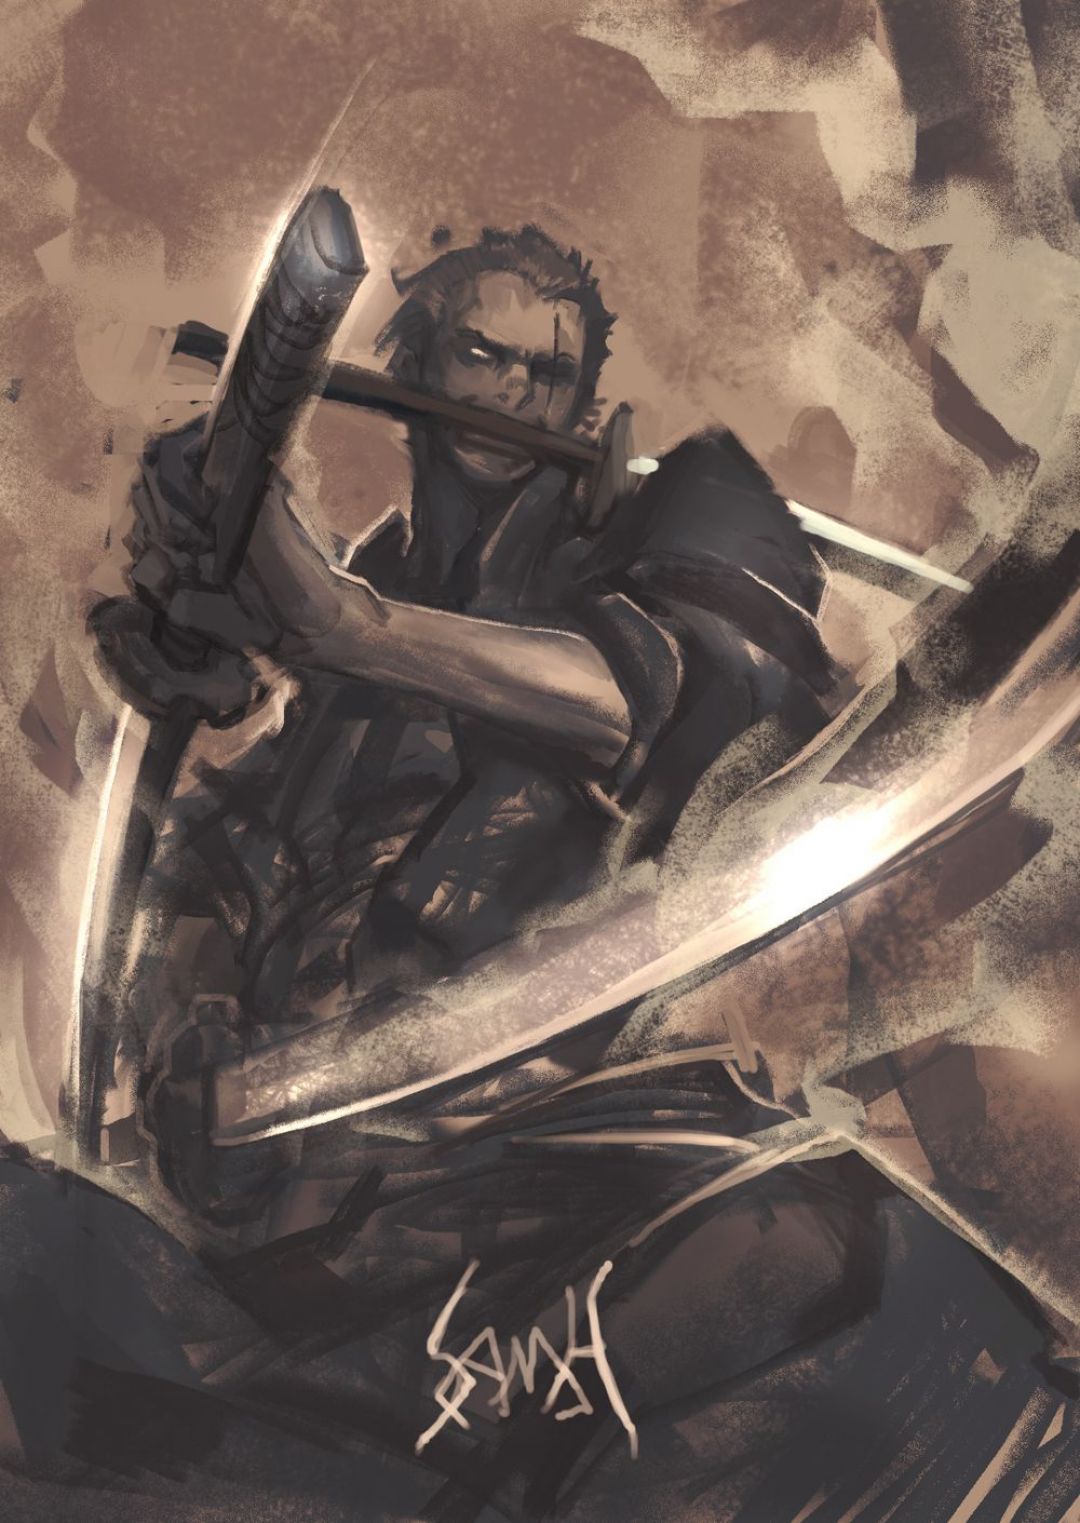 Roronoa Zoro PIECE Anime Image Board / iPhone HD Wallpaper Background Download HD Wallpaper (Desktop Background / Android / iPhone) (1080p, 4k) (1080x1523) (2021)